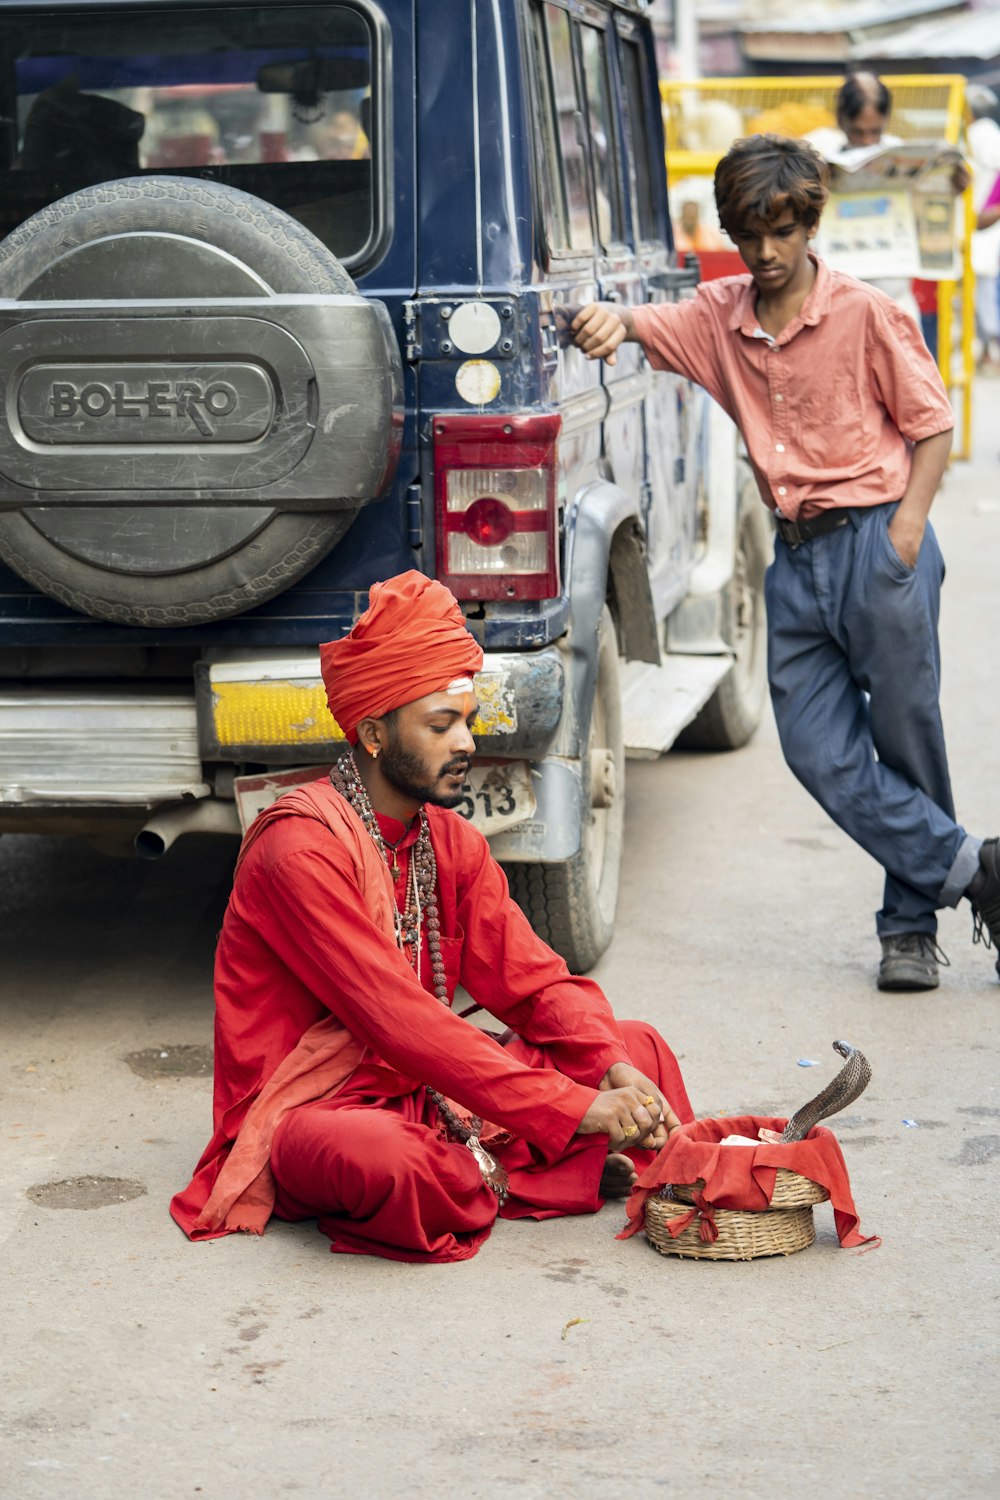 man wearing red thobe robe sitting and playing with snake and another man standing and touching blue vehicle while watching man performing